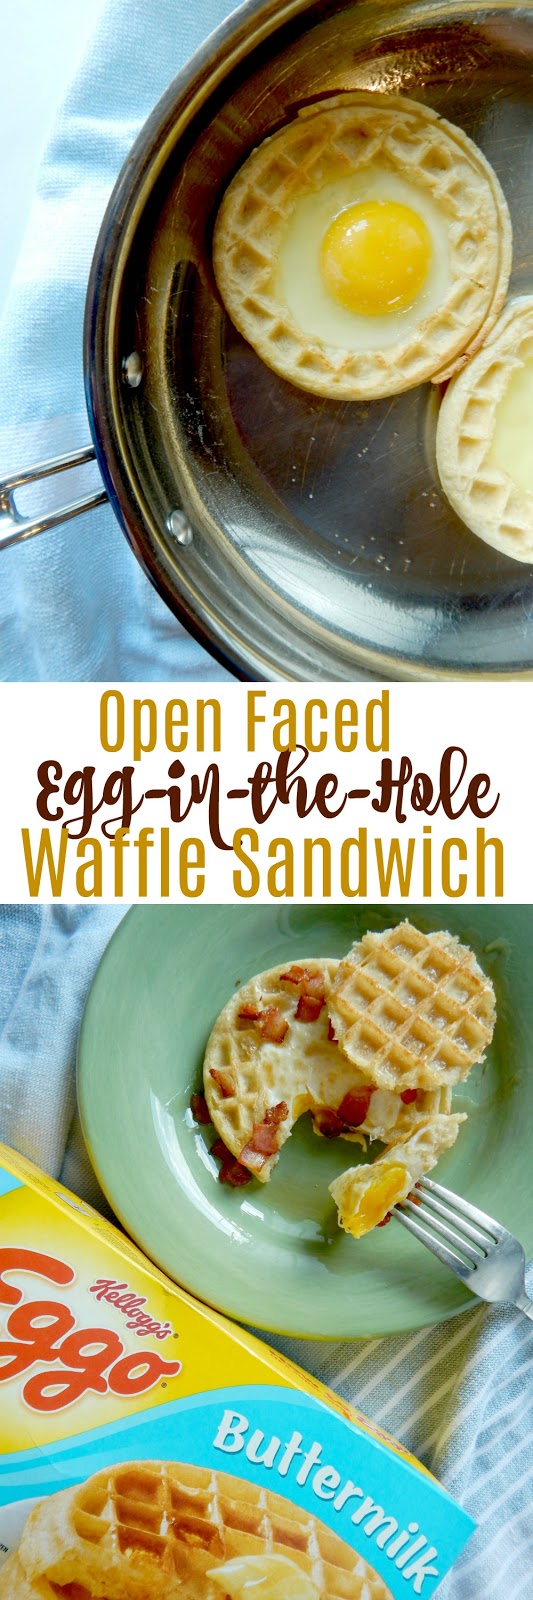 Open Faced Egg-in-the-Hole Waffle Sandwich...back-to-school season is upon us and our kids need to start their day {and year} off right!  Eggo has partnered with Scholastic to help fuel kids' mind and body for the school year ahead.  This creative breakfast of a toasted waffle, fried egg, crispy bacon and maple syrup is top notch!  @eggorecipes #ad #LoveMyEggo #ReadingWithEggo (sweetandsavoryfood.com)